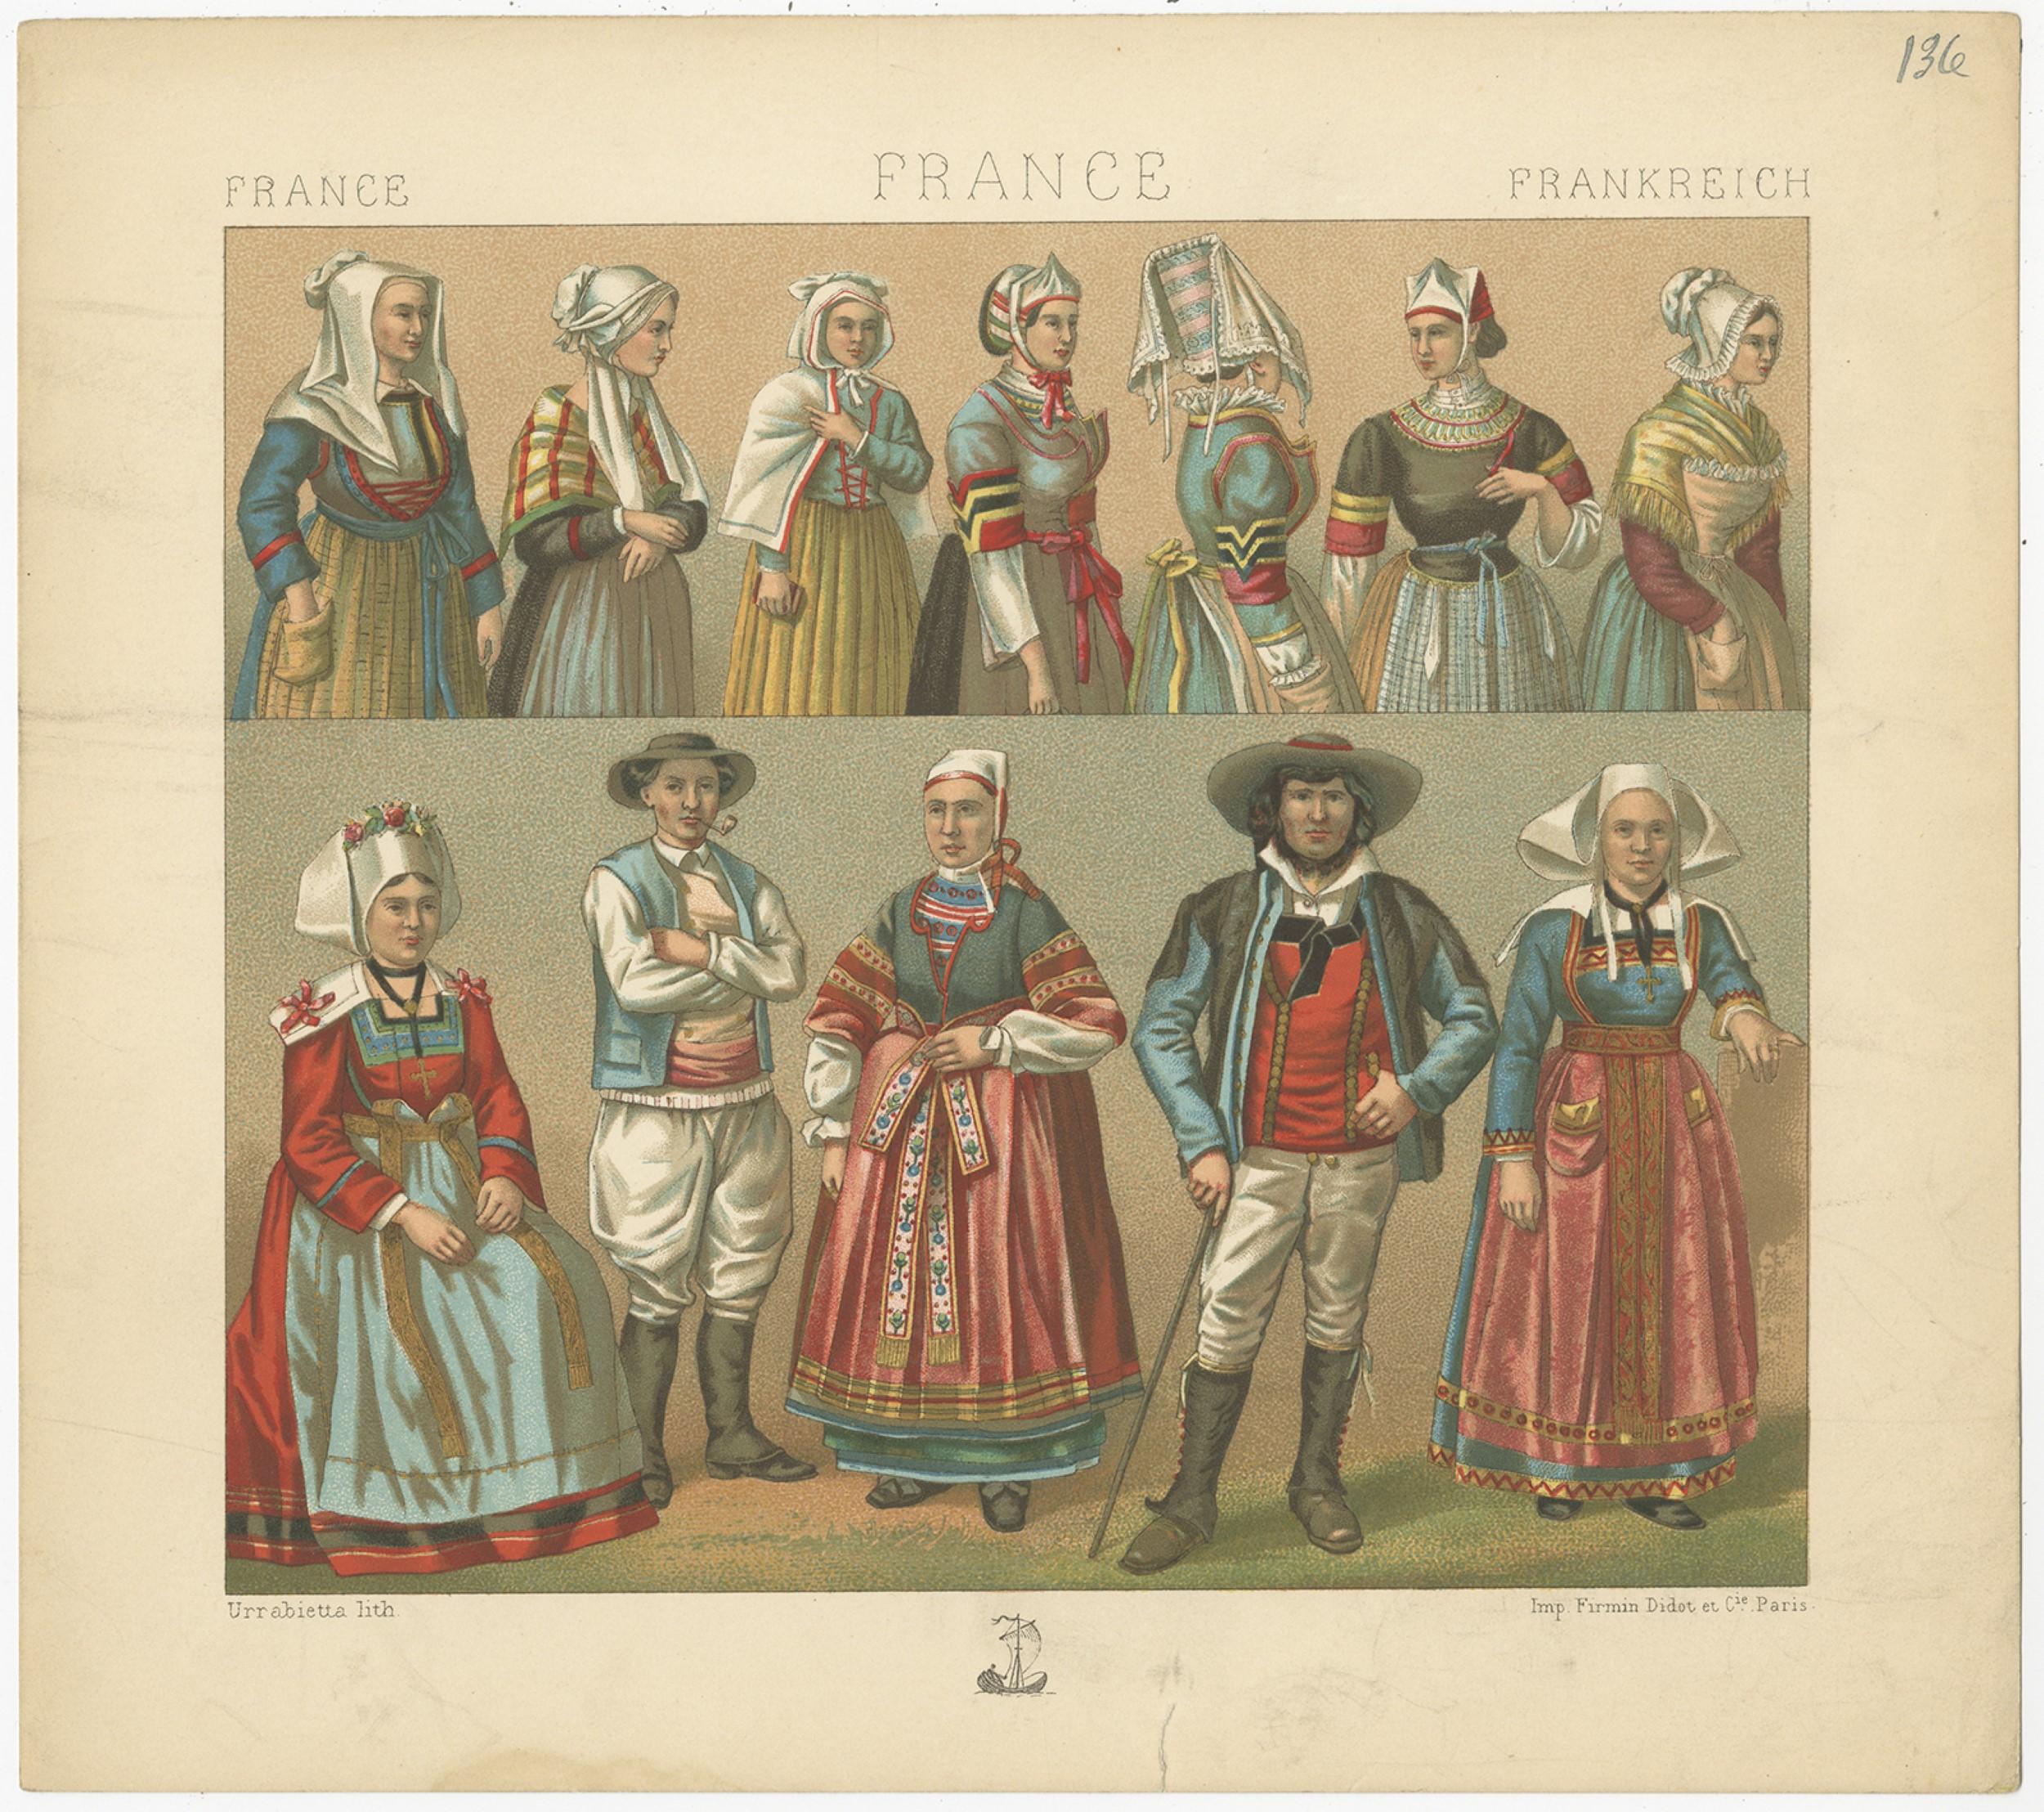 Antique print titled 'France - France - Frankreich'. Chromolithograph of French outfits. This print originates from 'Le Costume Historique' by M.A. Racinet. Published, circa 1880.

  